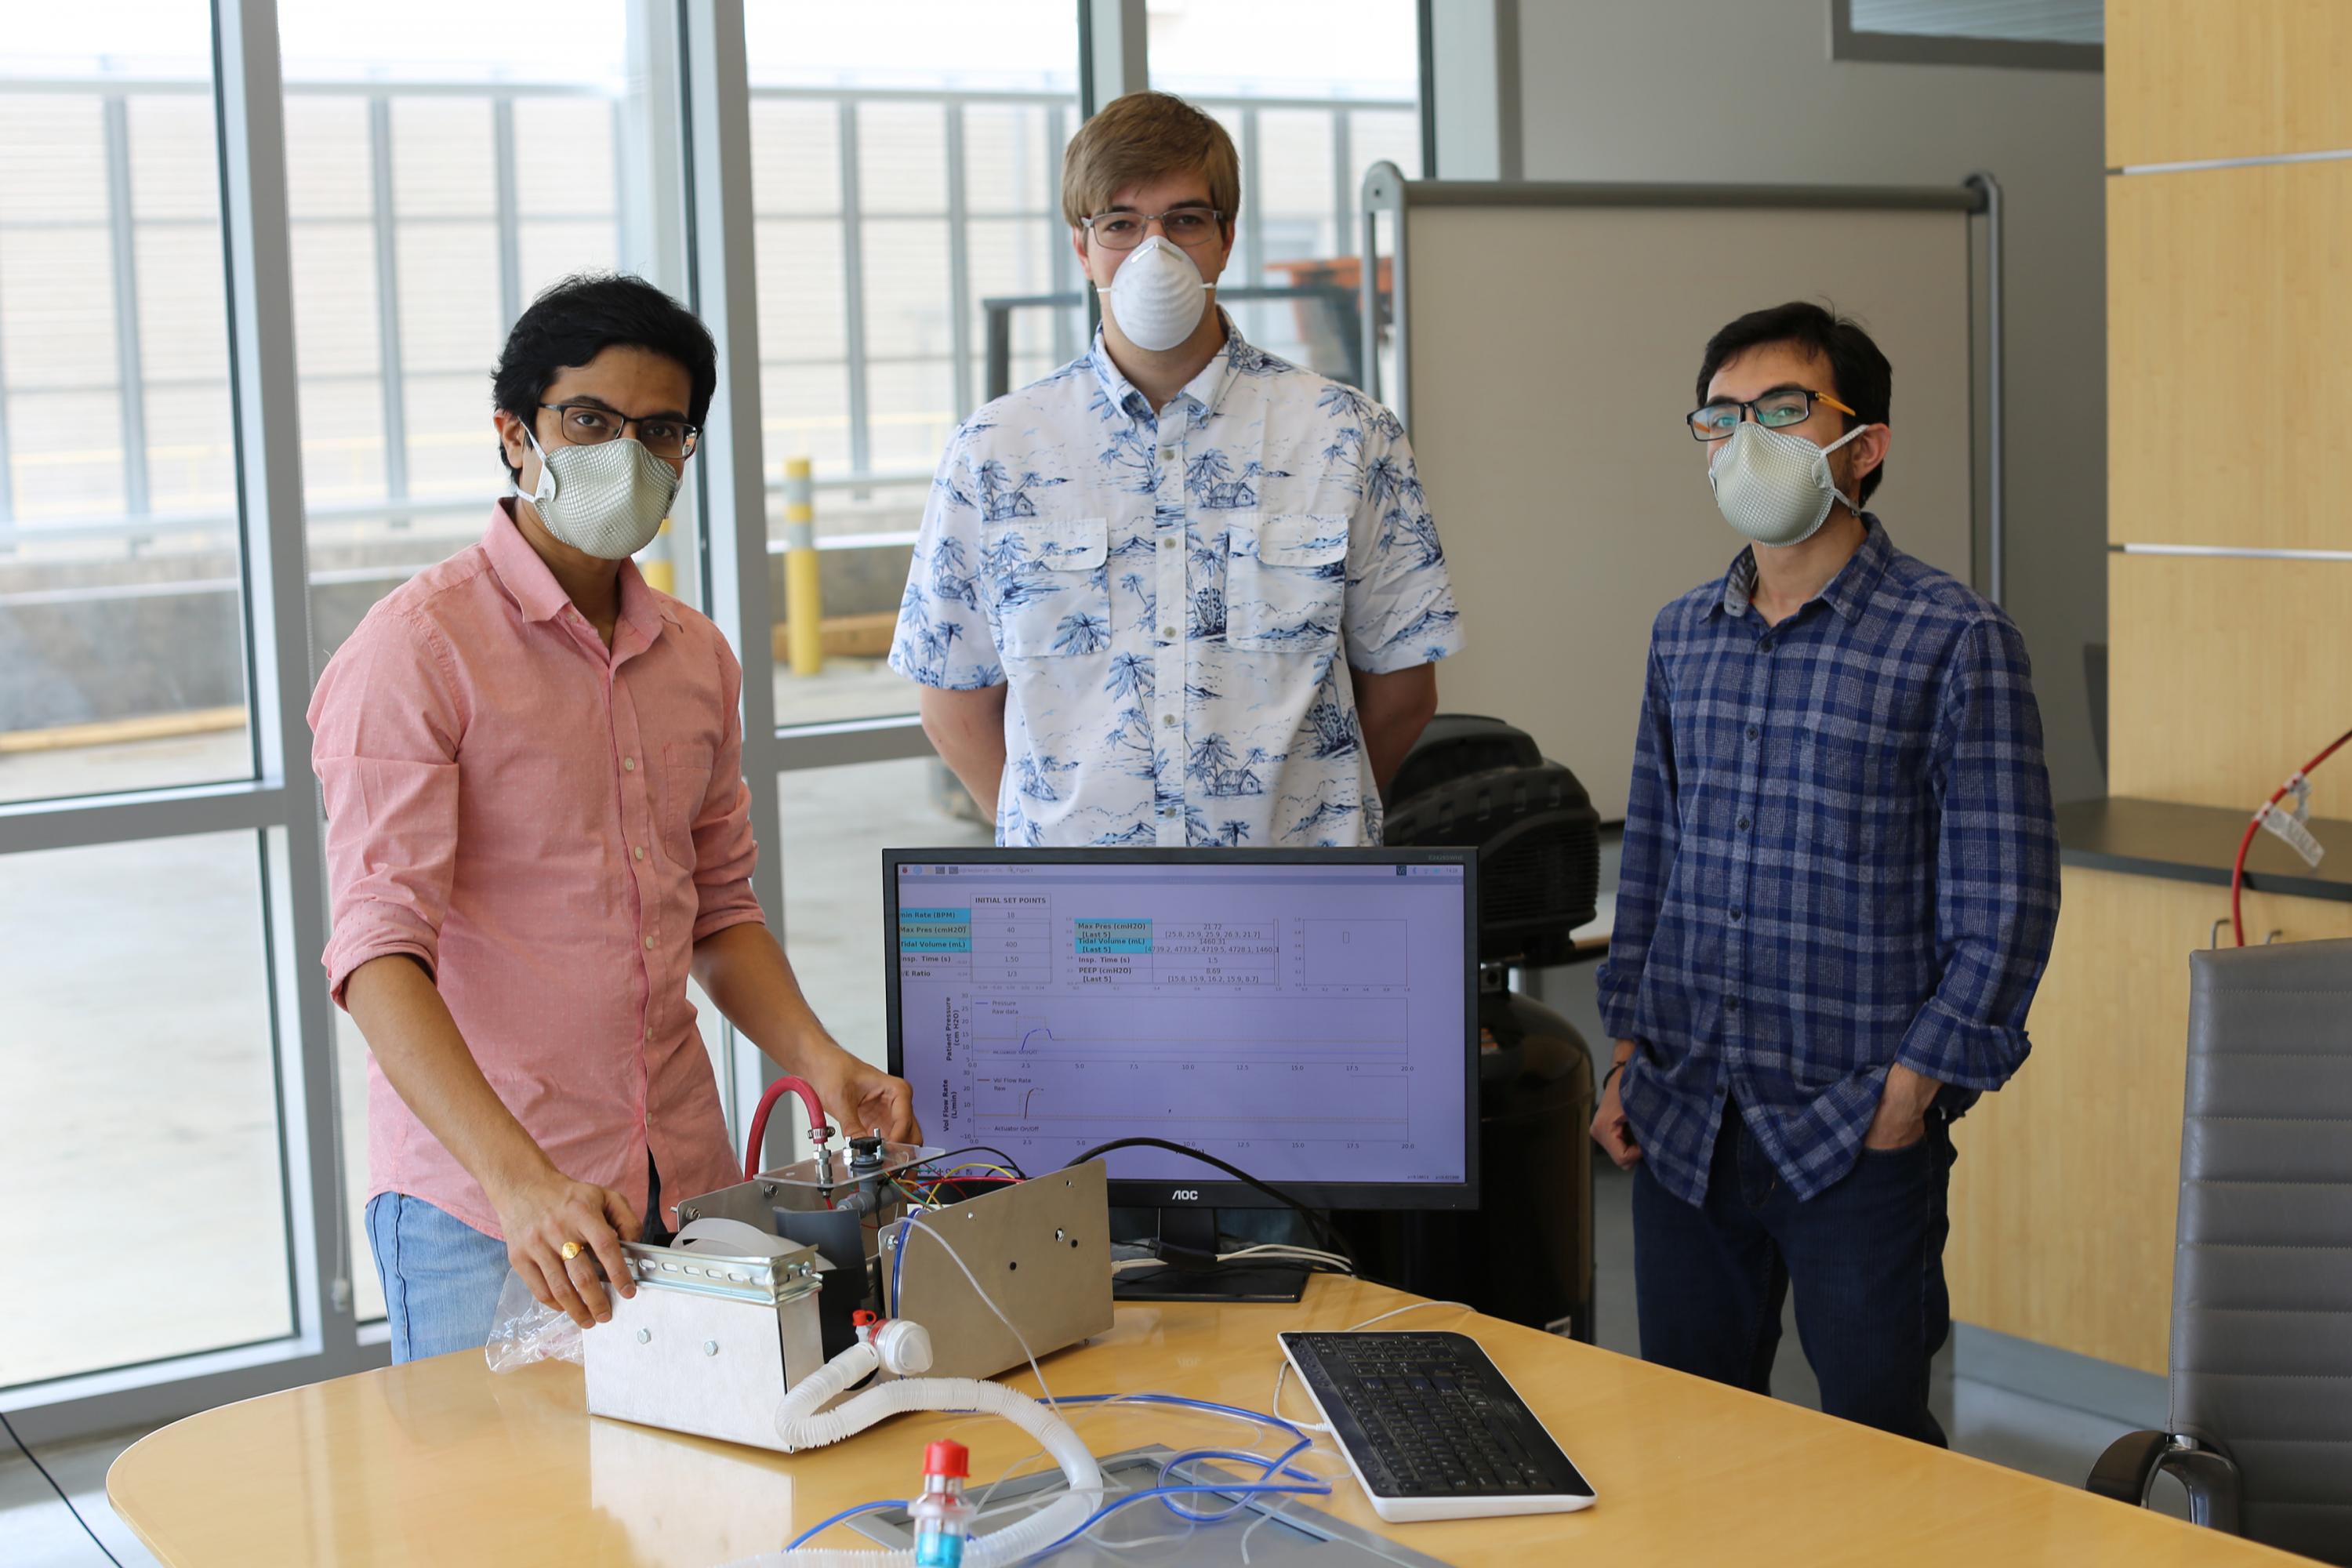 Georgia Tech Researchers Gokul Pathikonda, Stephen Johnston and Prithayan Barua are shown with their Open-AirVentGT, a low-cost, portable emergency ventilator that uses electronic sensors and computer control to manage key clinical parameters. (Credit: Ben Wright, Georgia Tech)